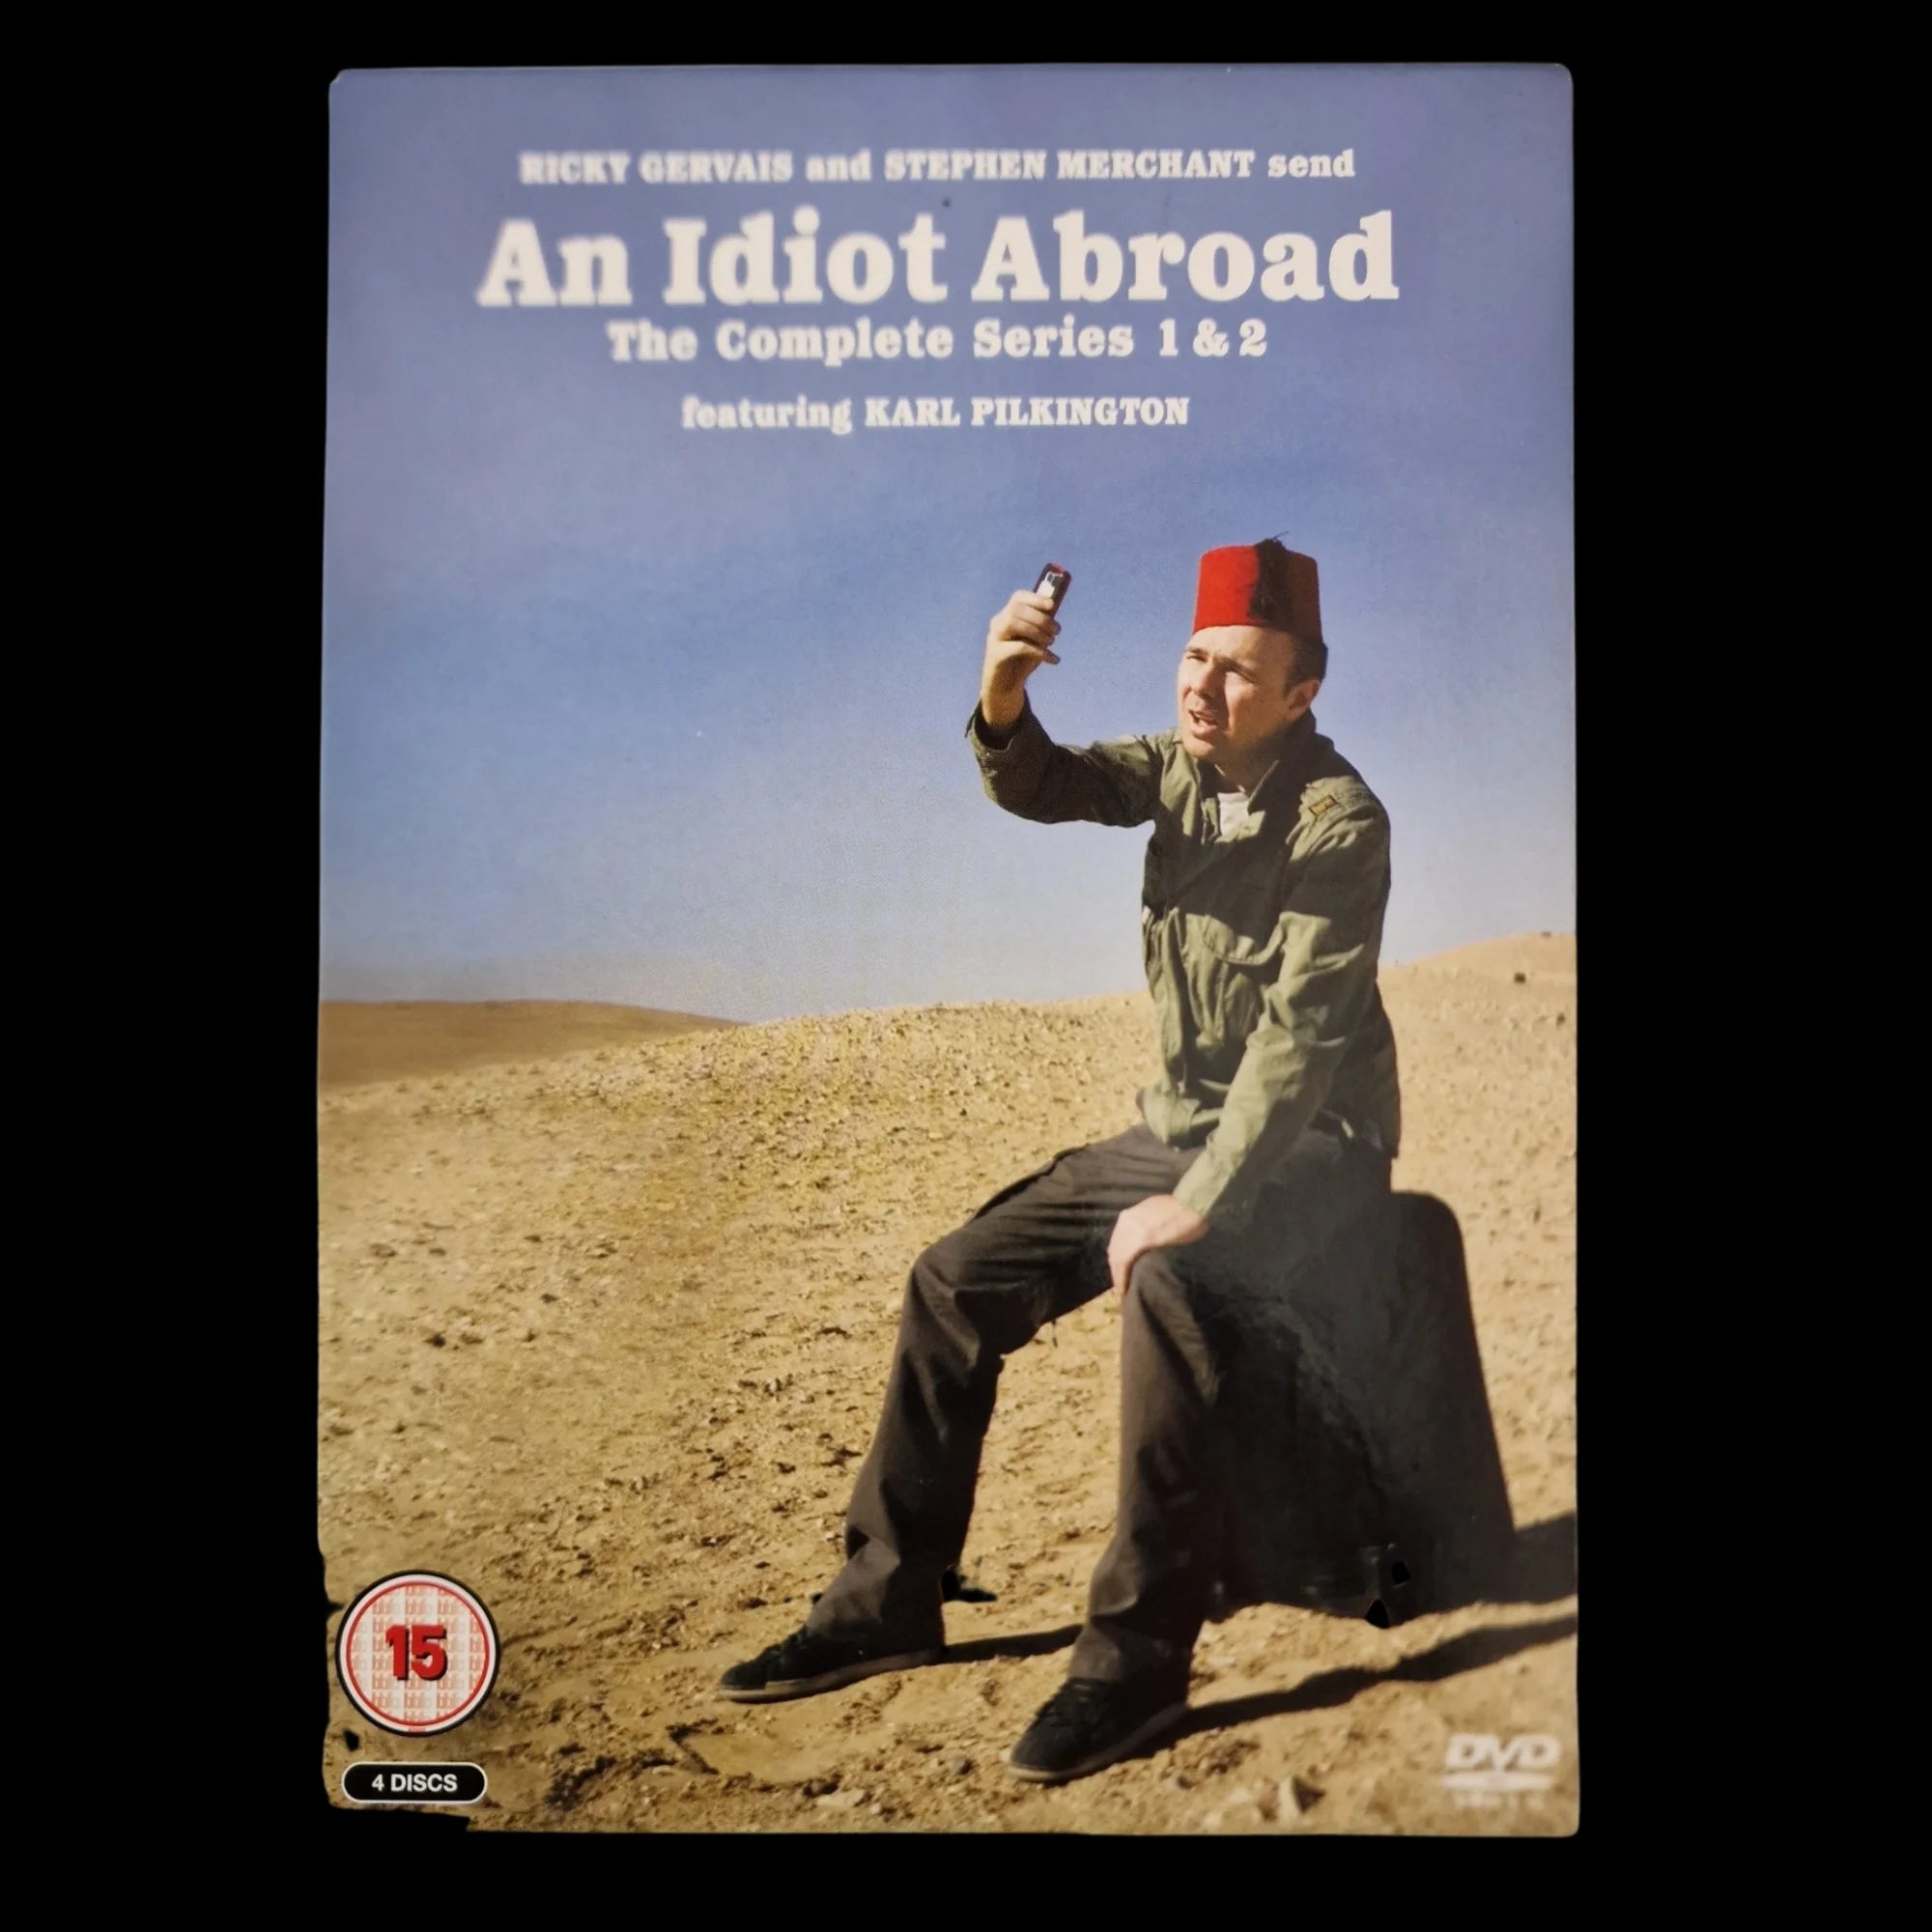 An Idiot Abroad Series 1 & 2 - Preloved - DVD - BSKYB - 1394